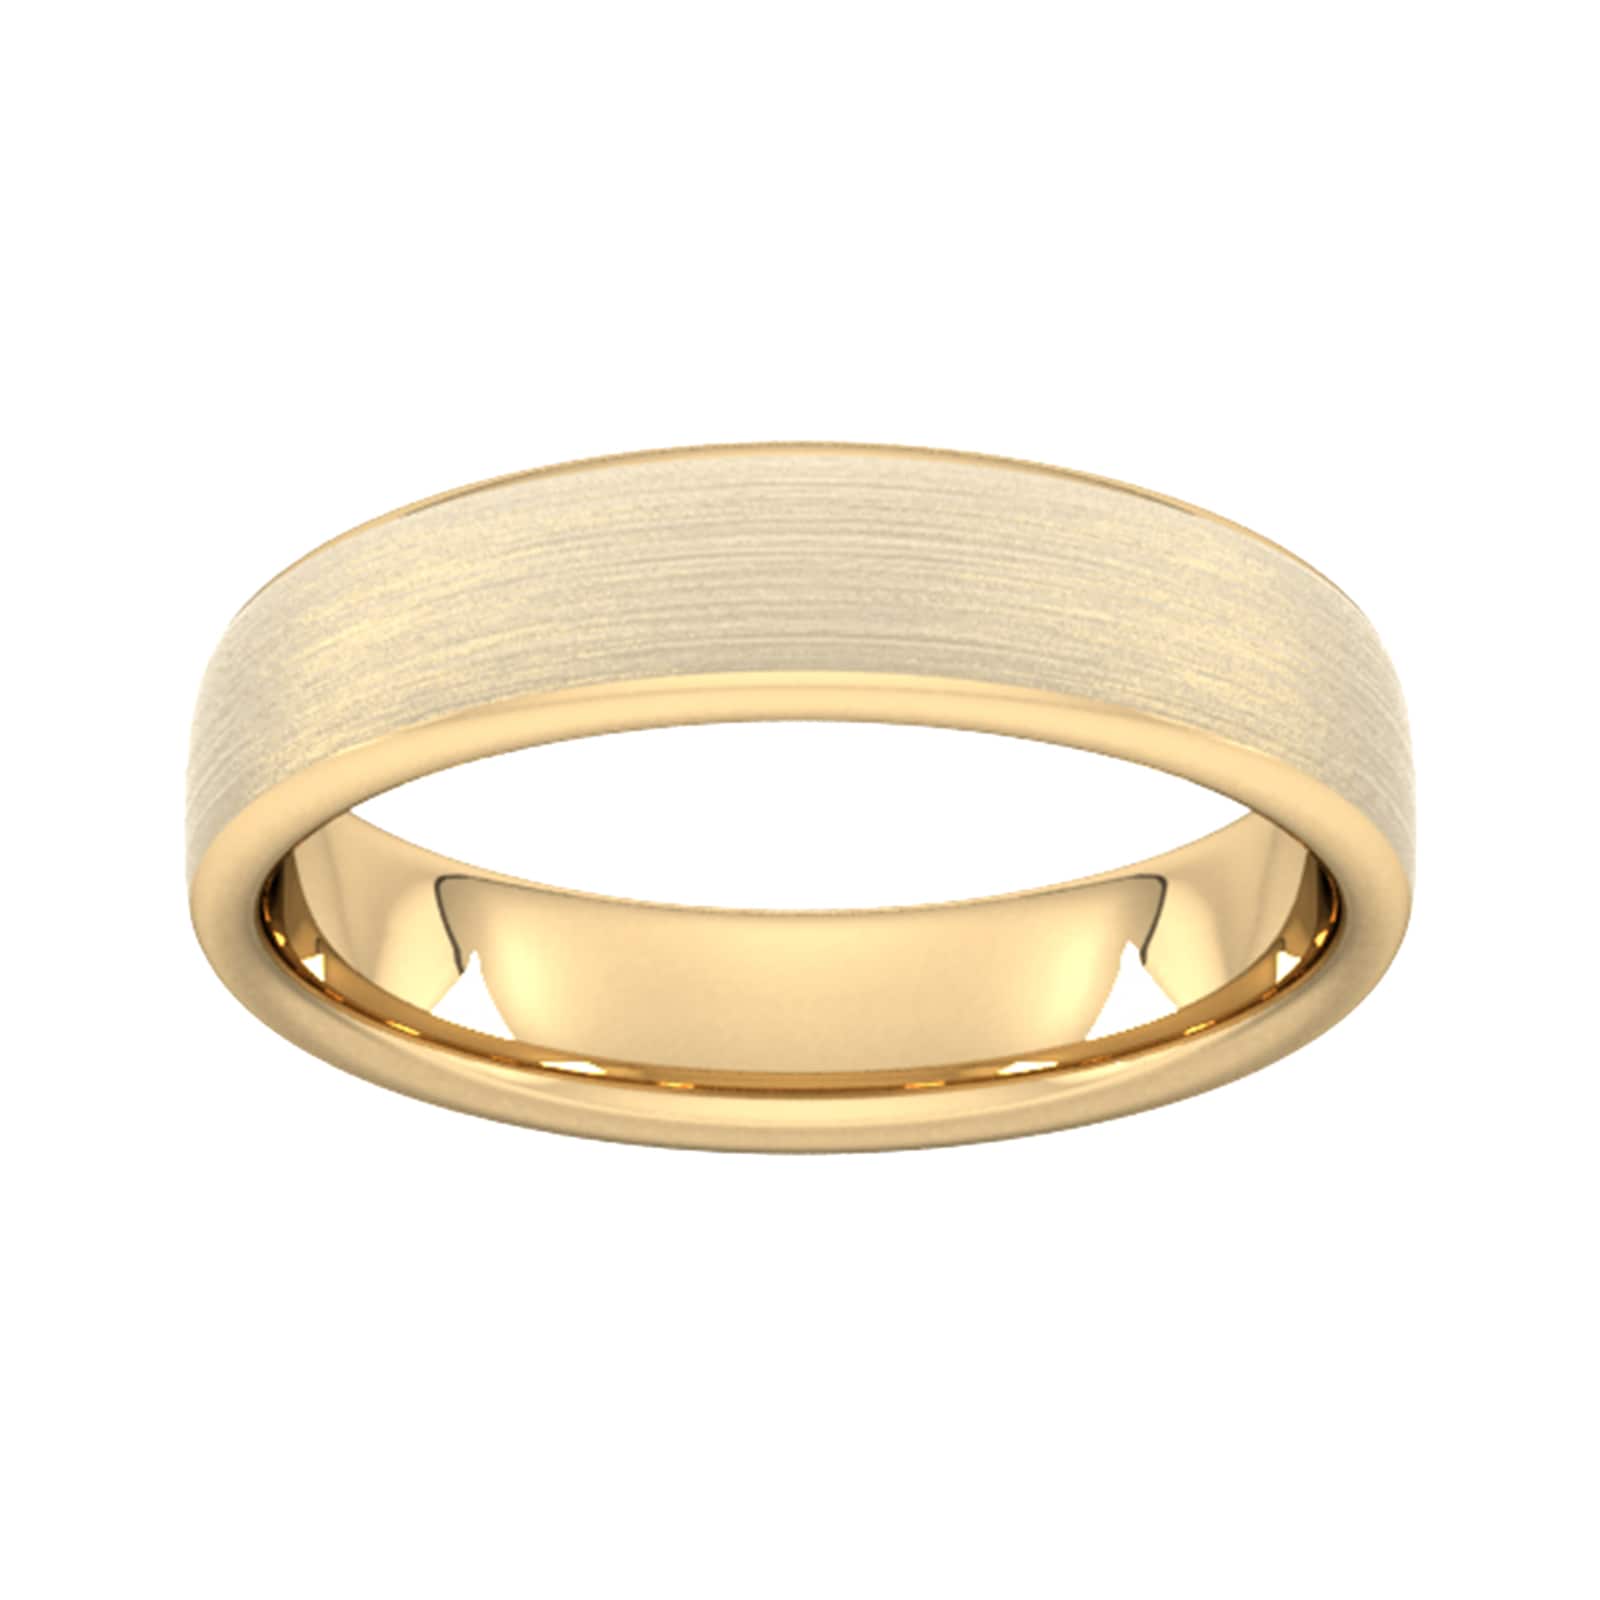 5mm Flat Court Heavy Matt Finished Wedding Ring In 18 Carat Yellow Gold - Ring Size M